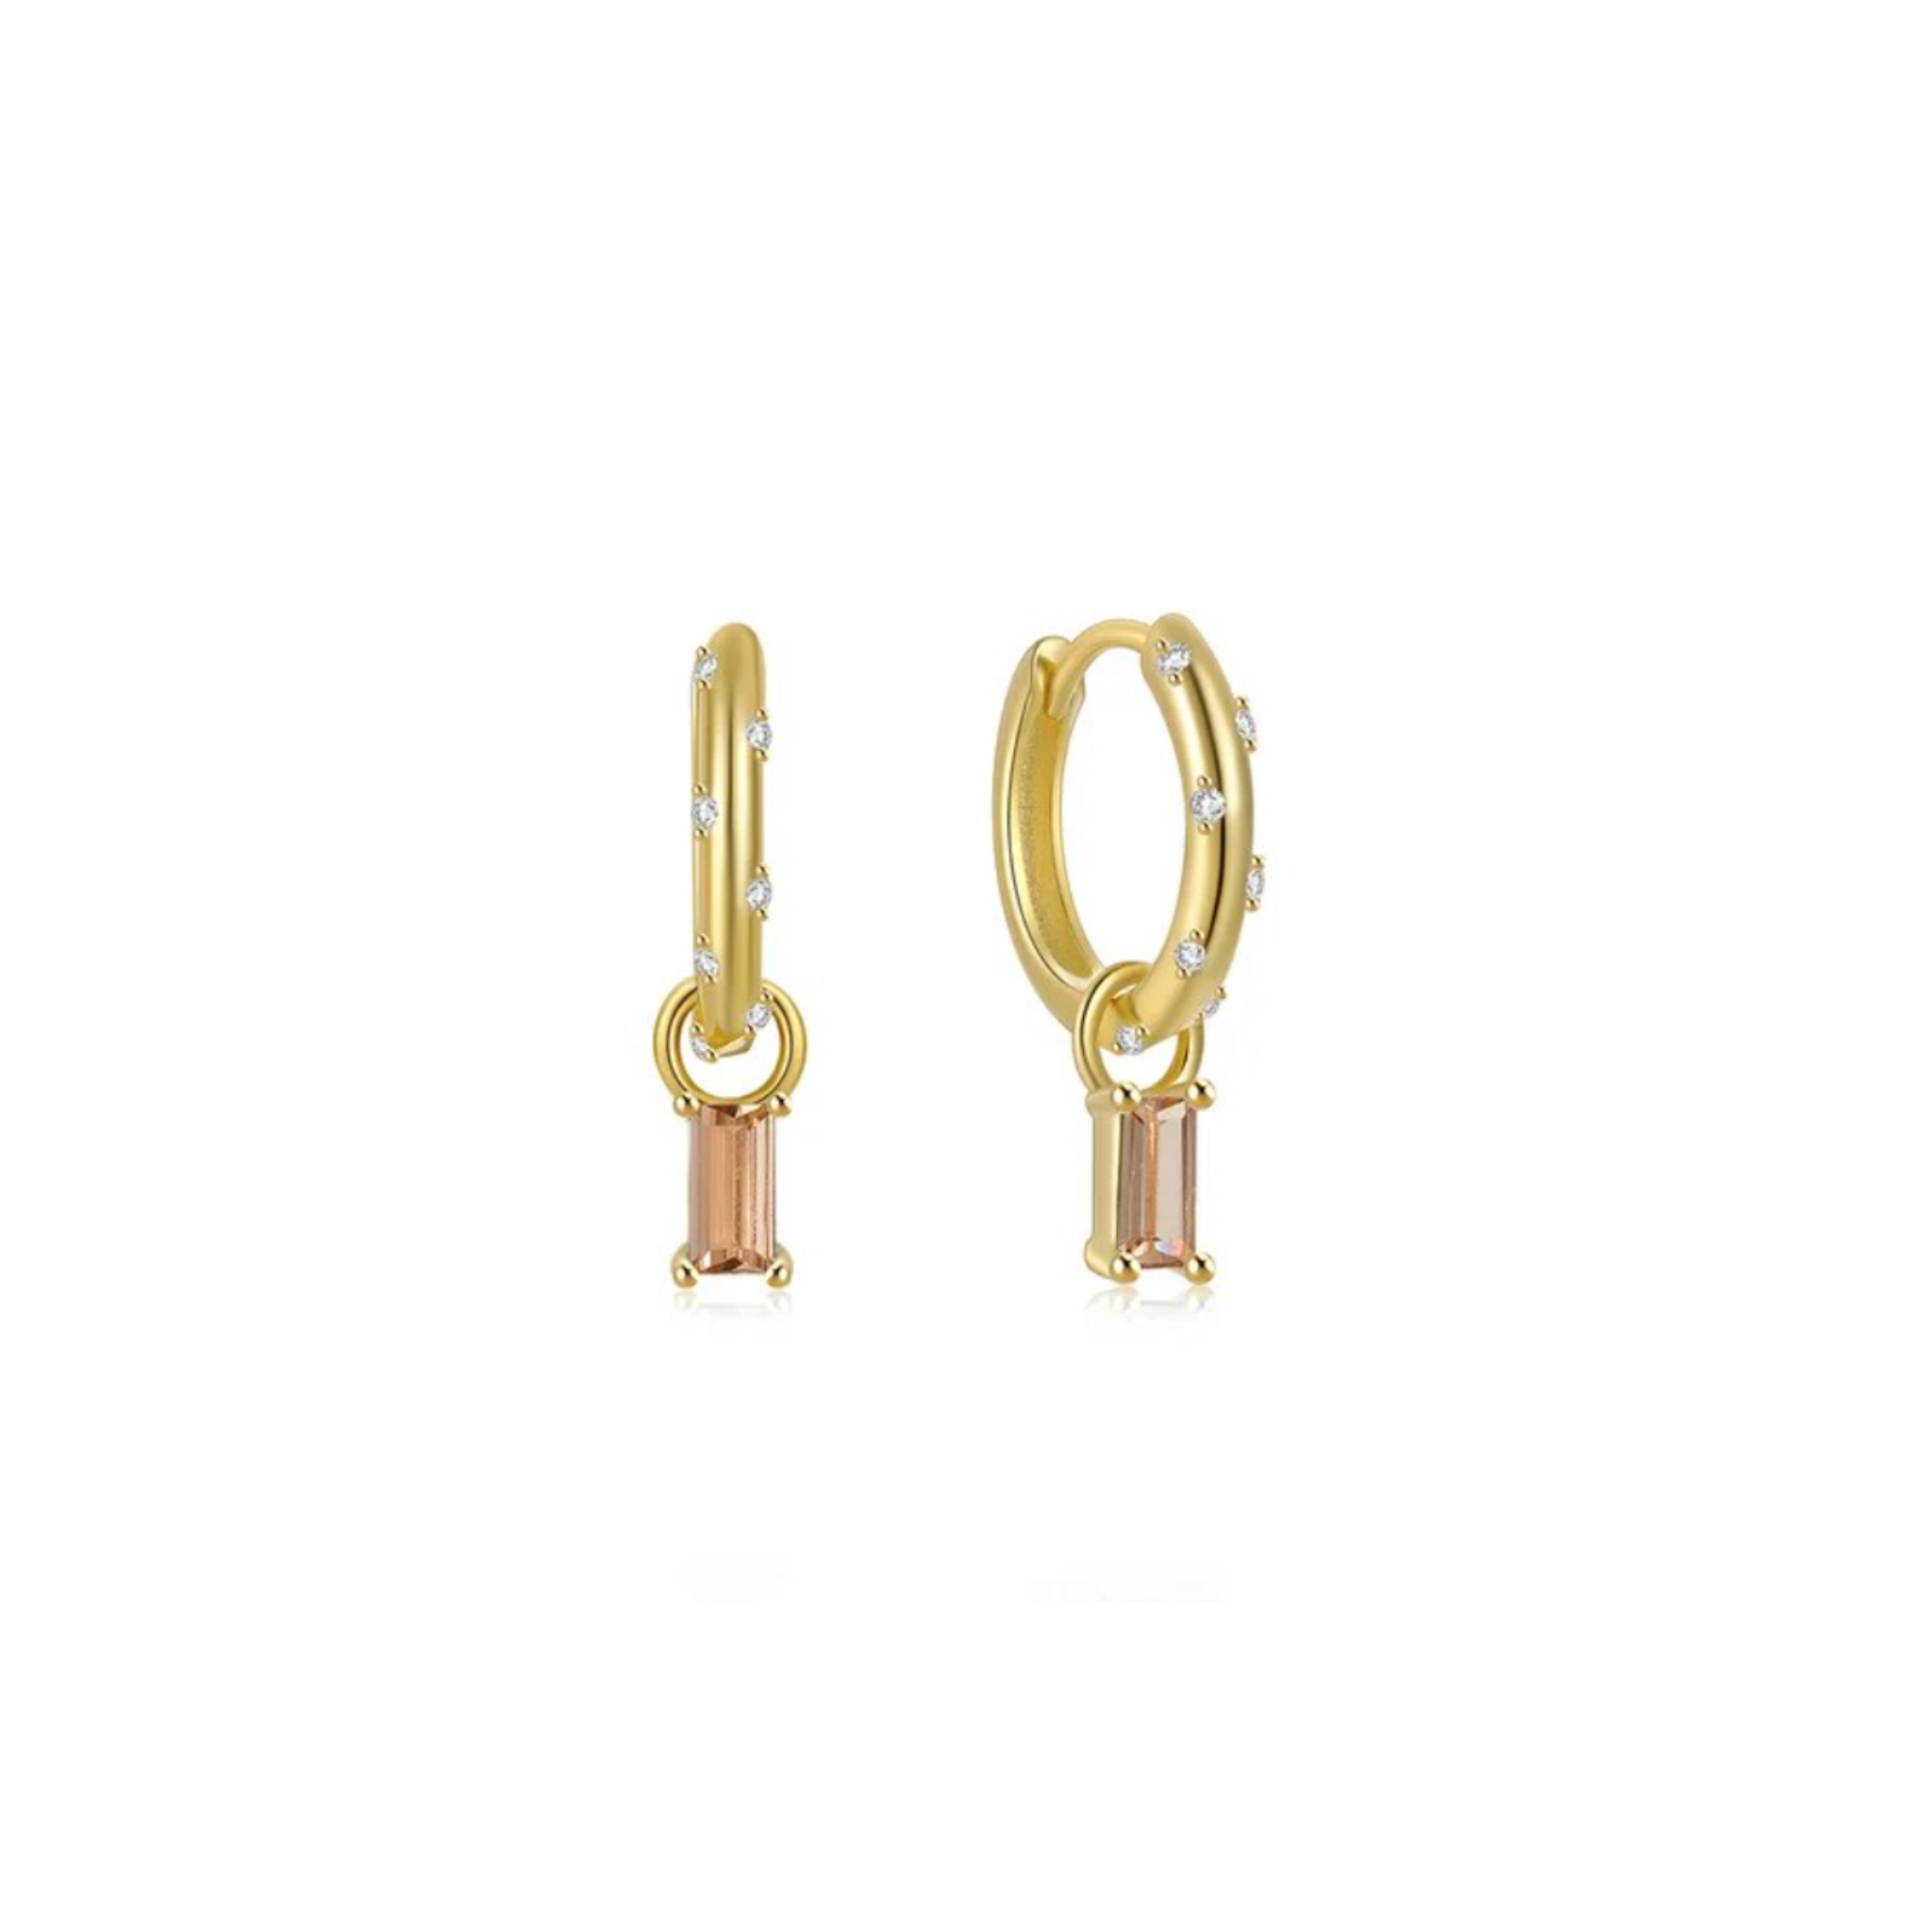 Gold Earring Charms sitting on gold dainty hoops